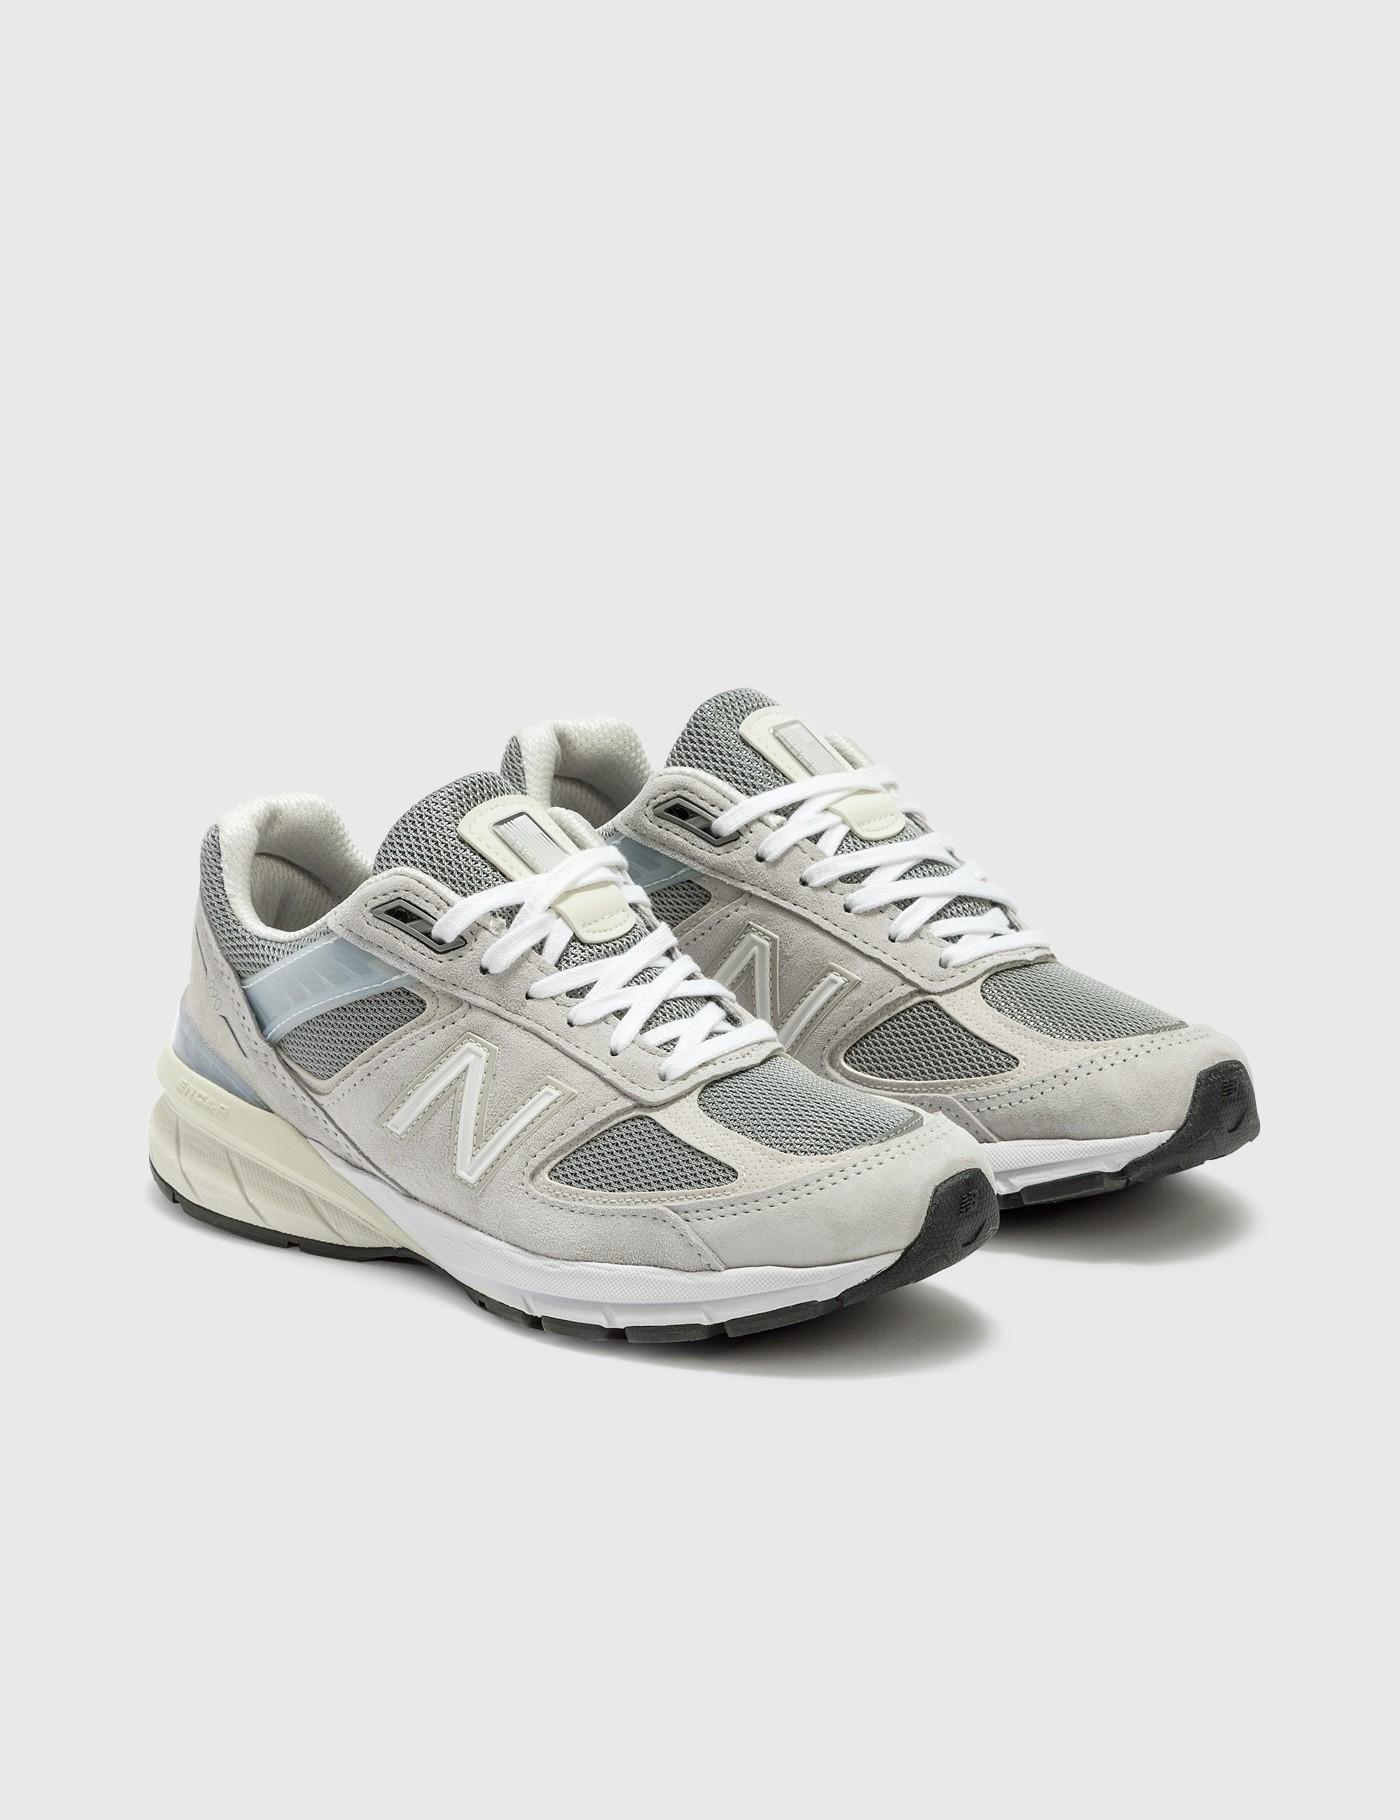 New Balance Suede 990v5 in White - Lyst